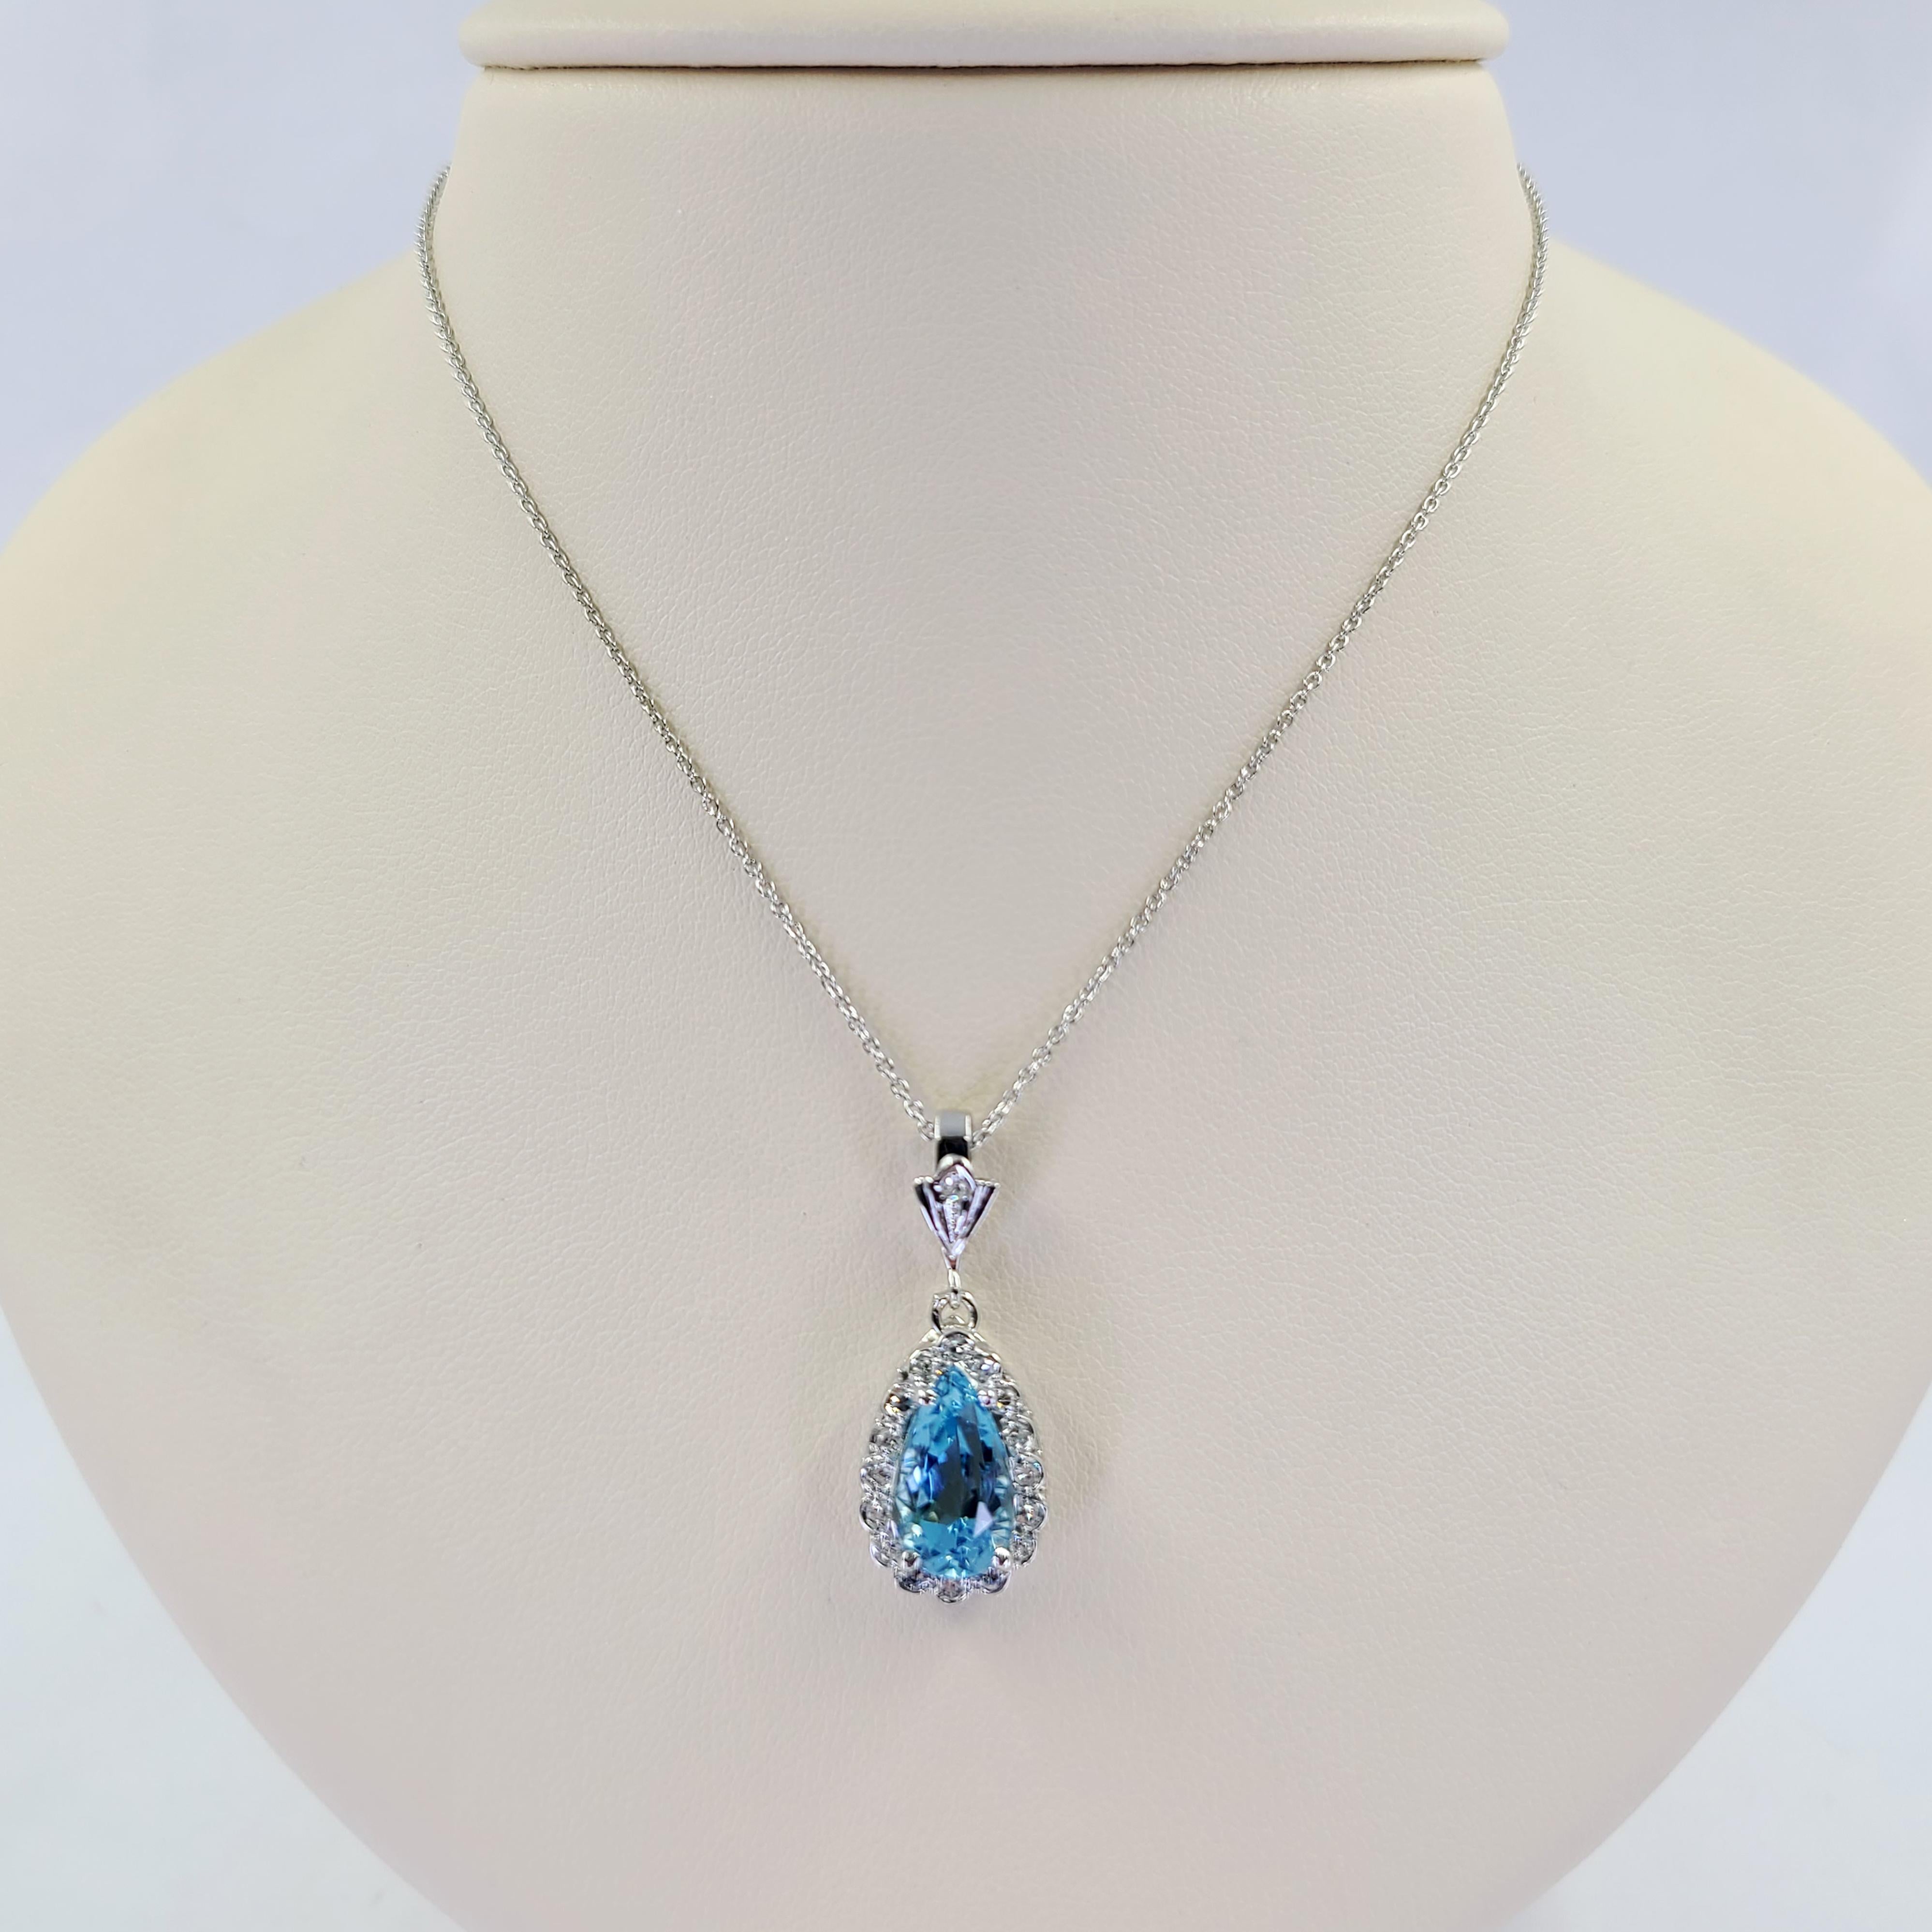 14 Karat White Gold Hinged Pendant Necklace Featuring A Pear Cut Aquamarine Estimated To Weigh 3.00 Carats Surrounded By 16 Single Cut Diamonds of VS Clarity and G/H Color Totaling 0.25 Carats. 16 Inch Rolo Chain with Lobster Clasp. Finished Weight